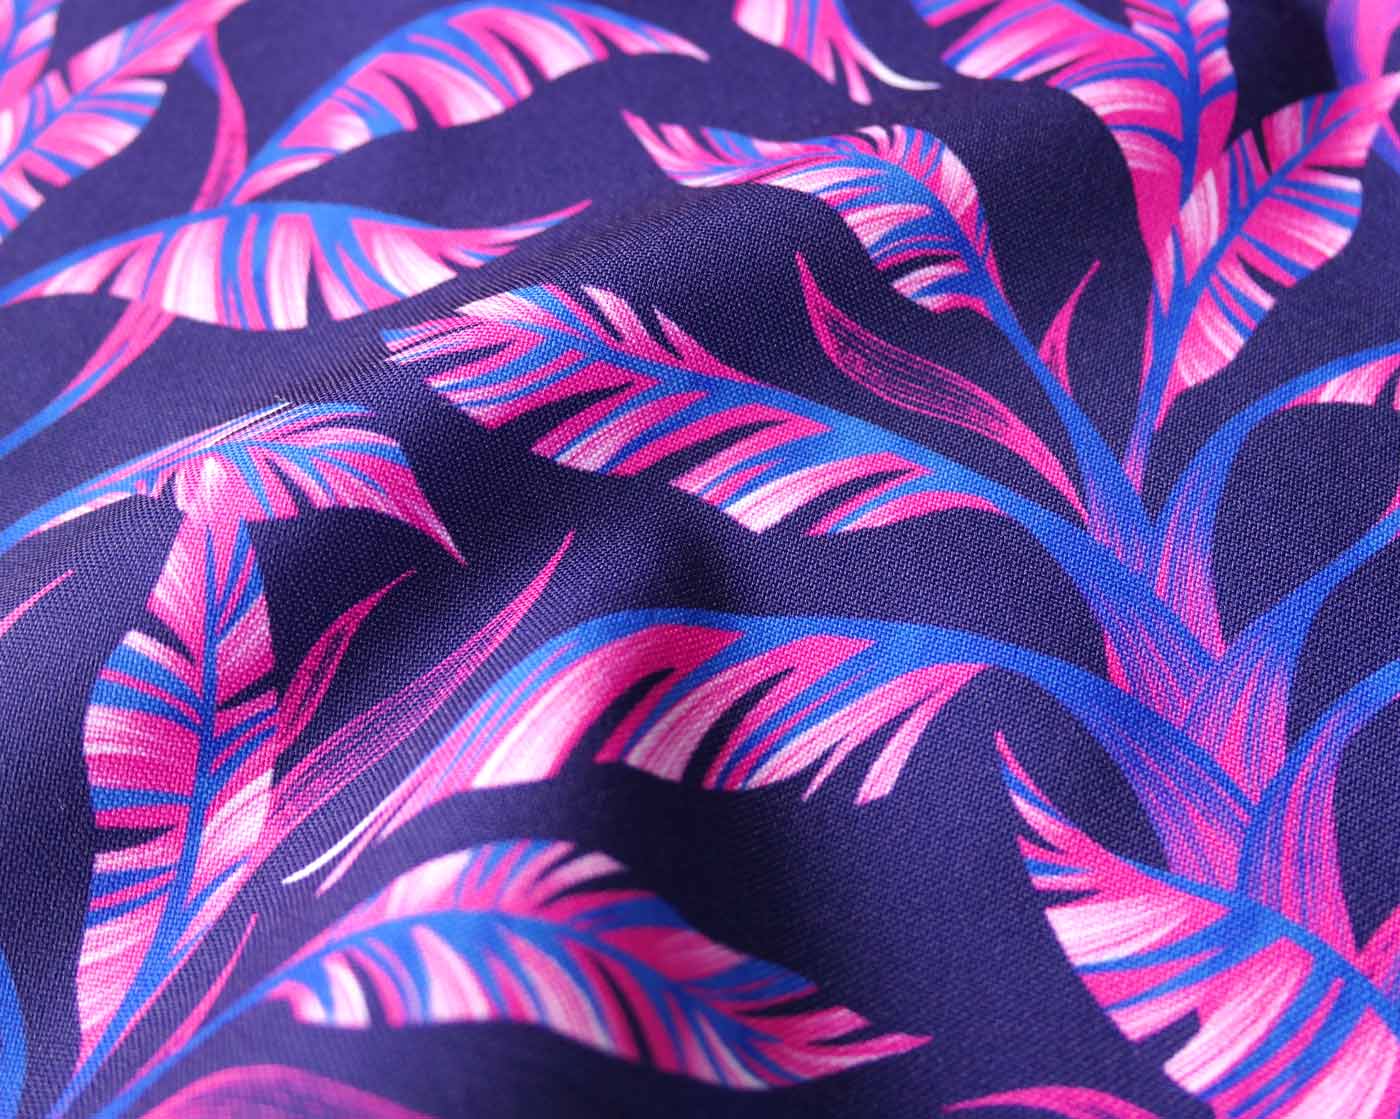 Tropical pink and purple banana leaf pattern fabric by Andrea Muller